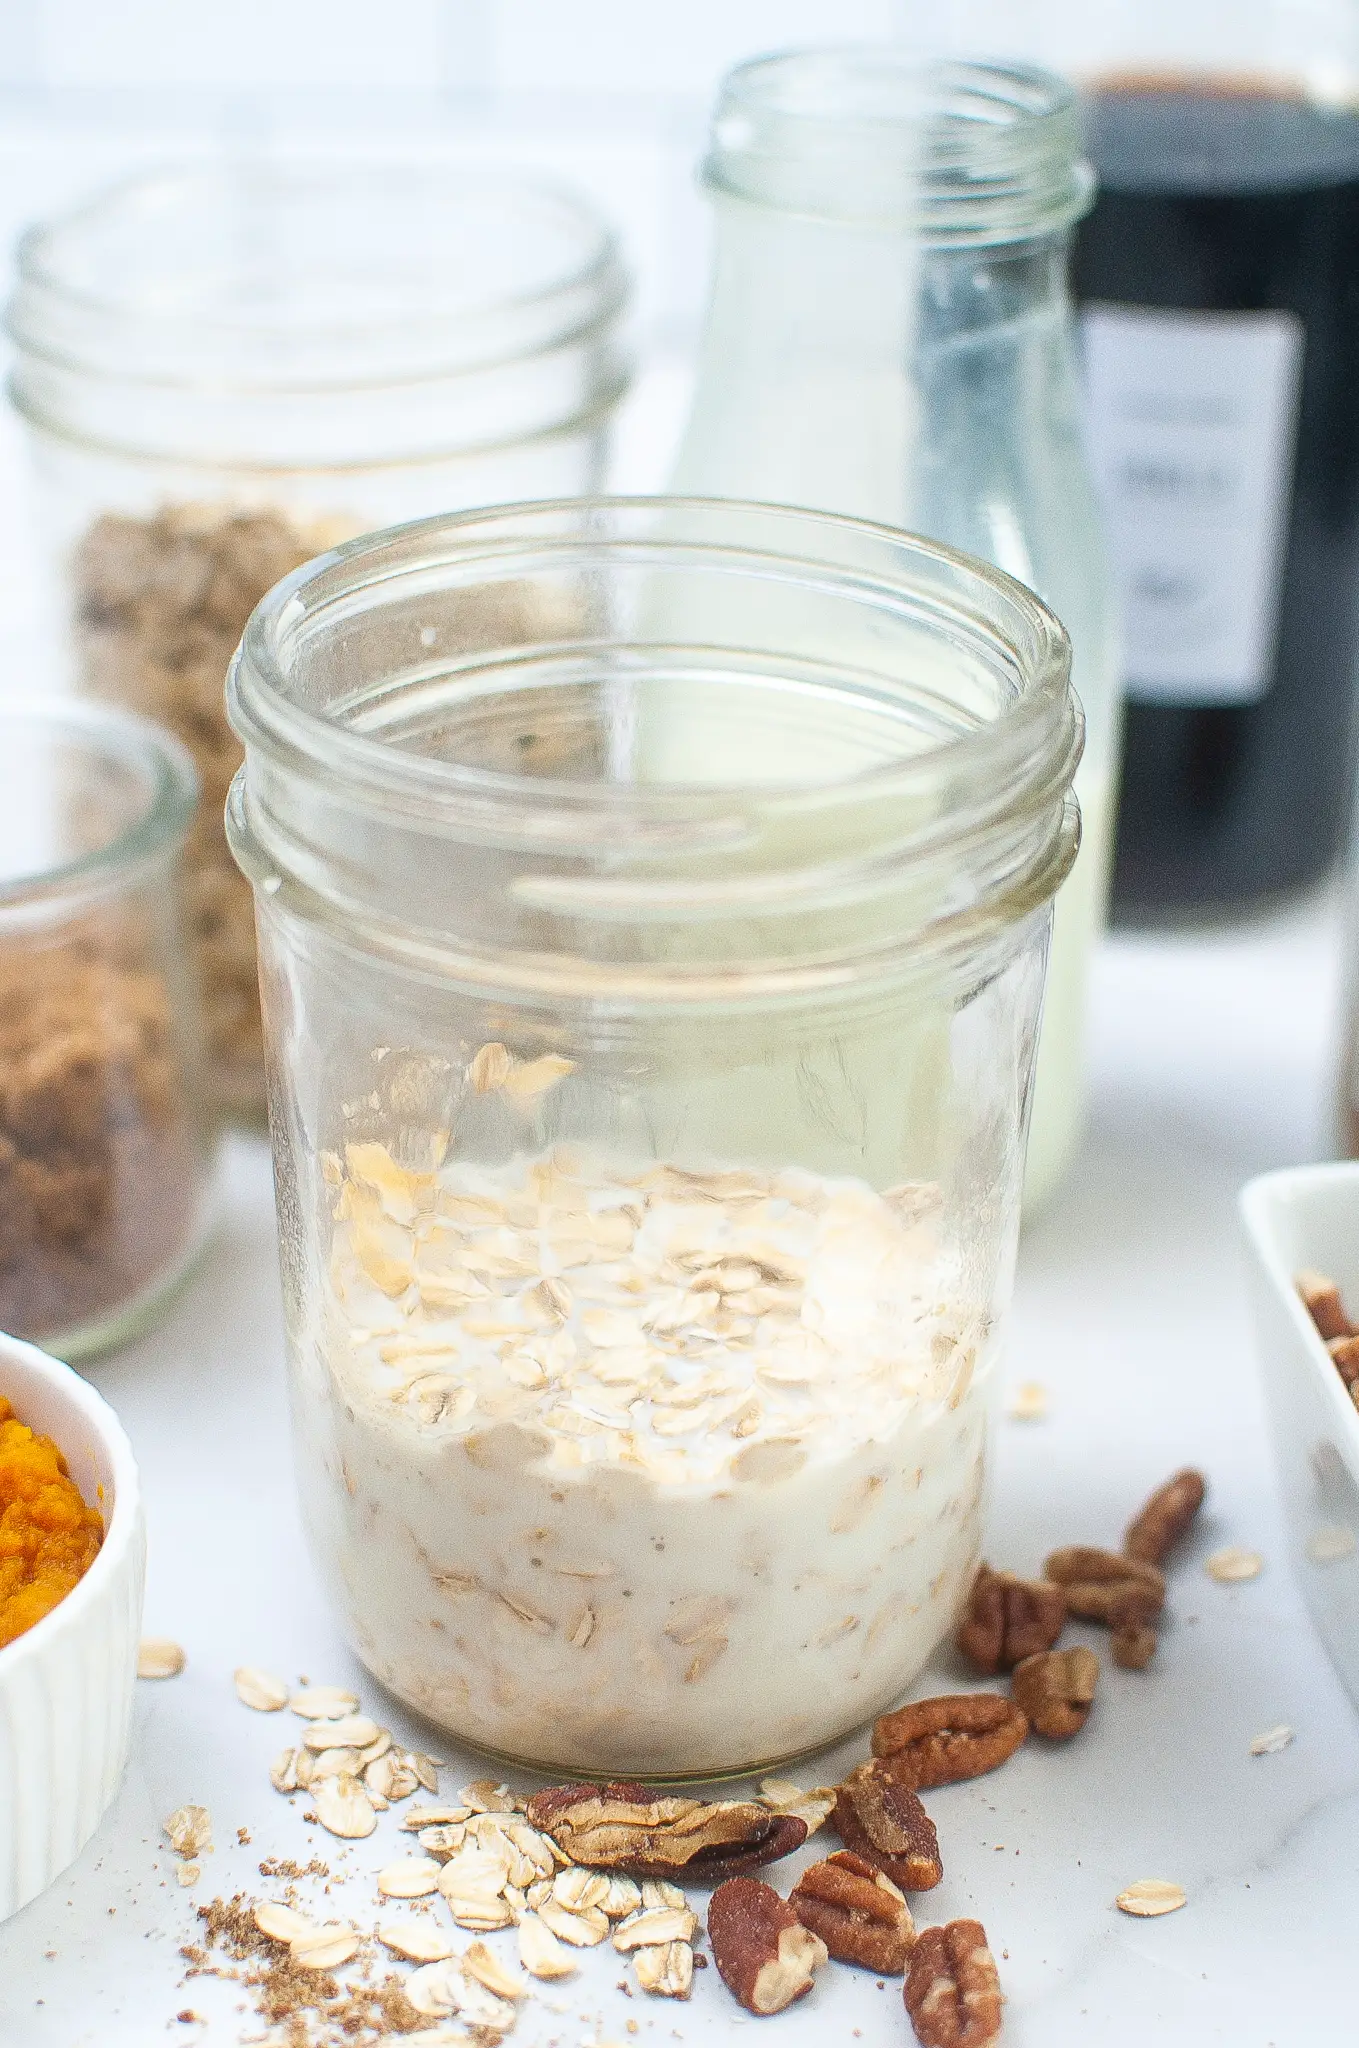 1/2 cup Whole milk & 1/2 cup Old fashioned oats in a jar.